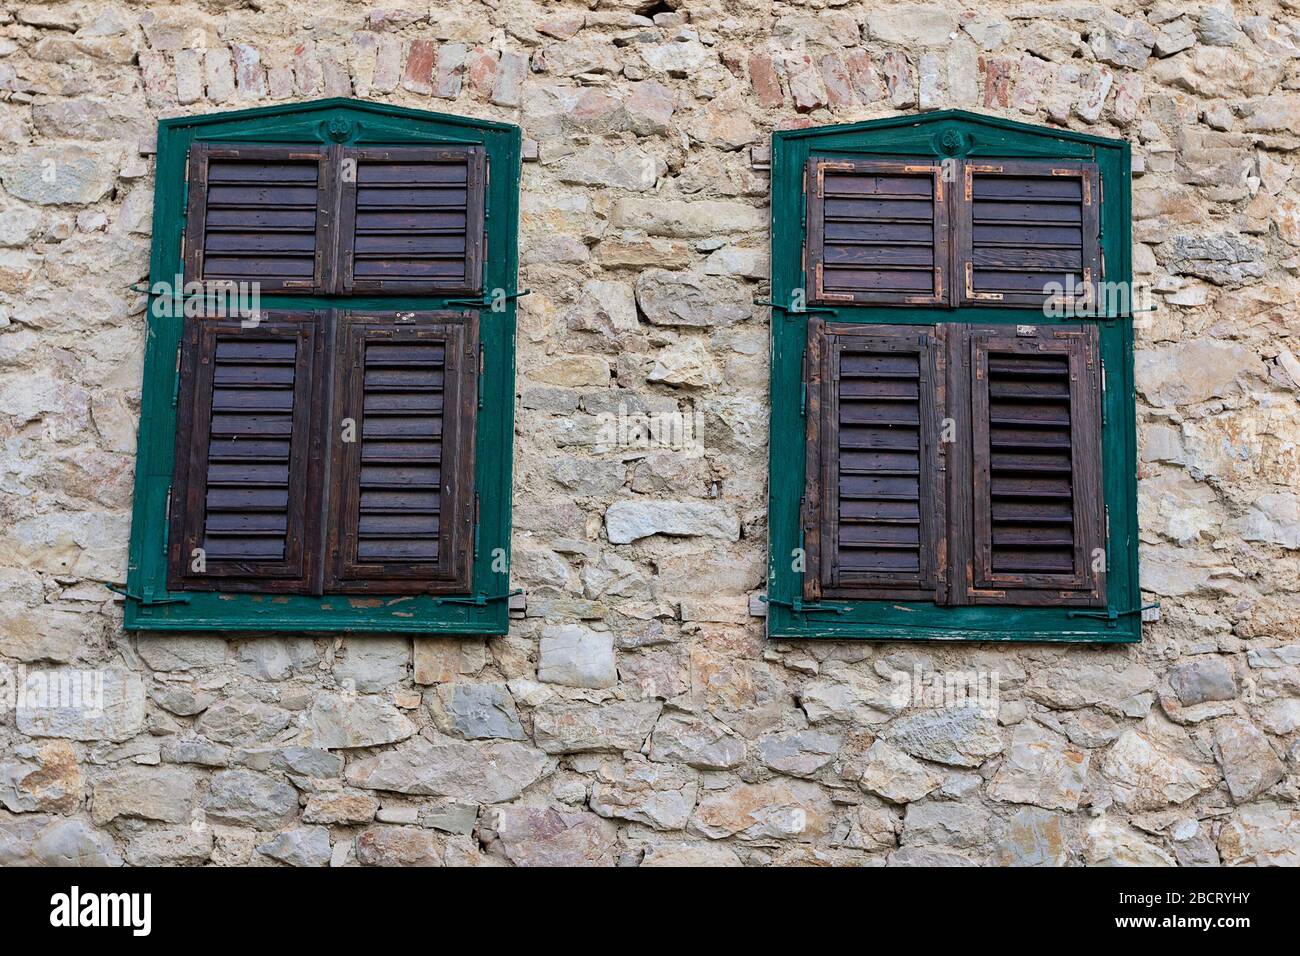 two windows on old house with stone exterior walls; wooden shutters closed Stock Photo